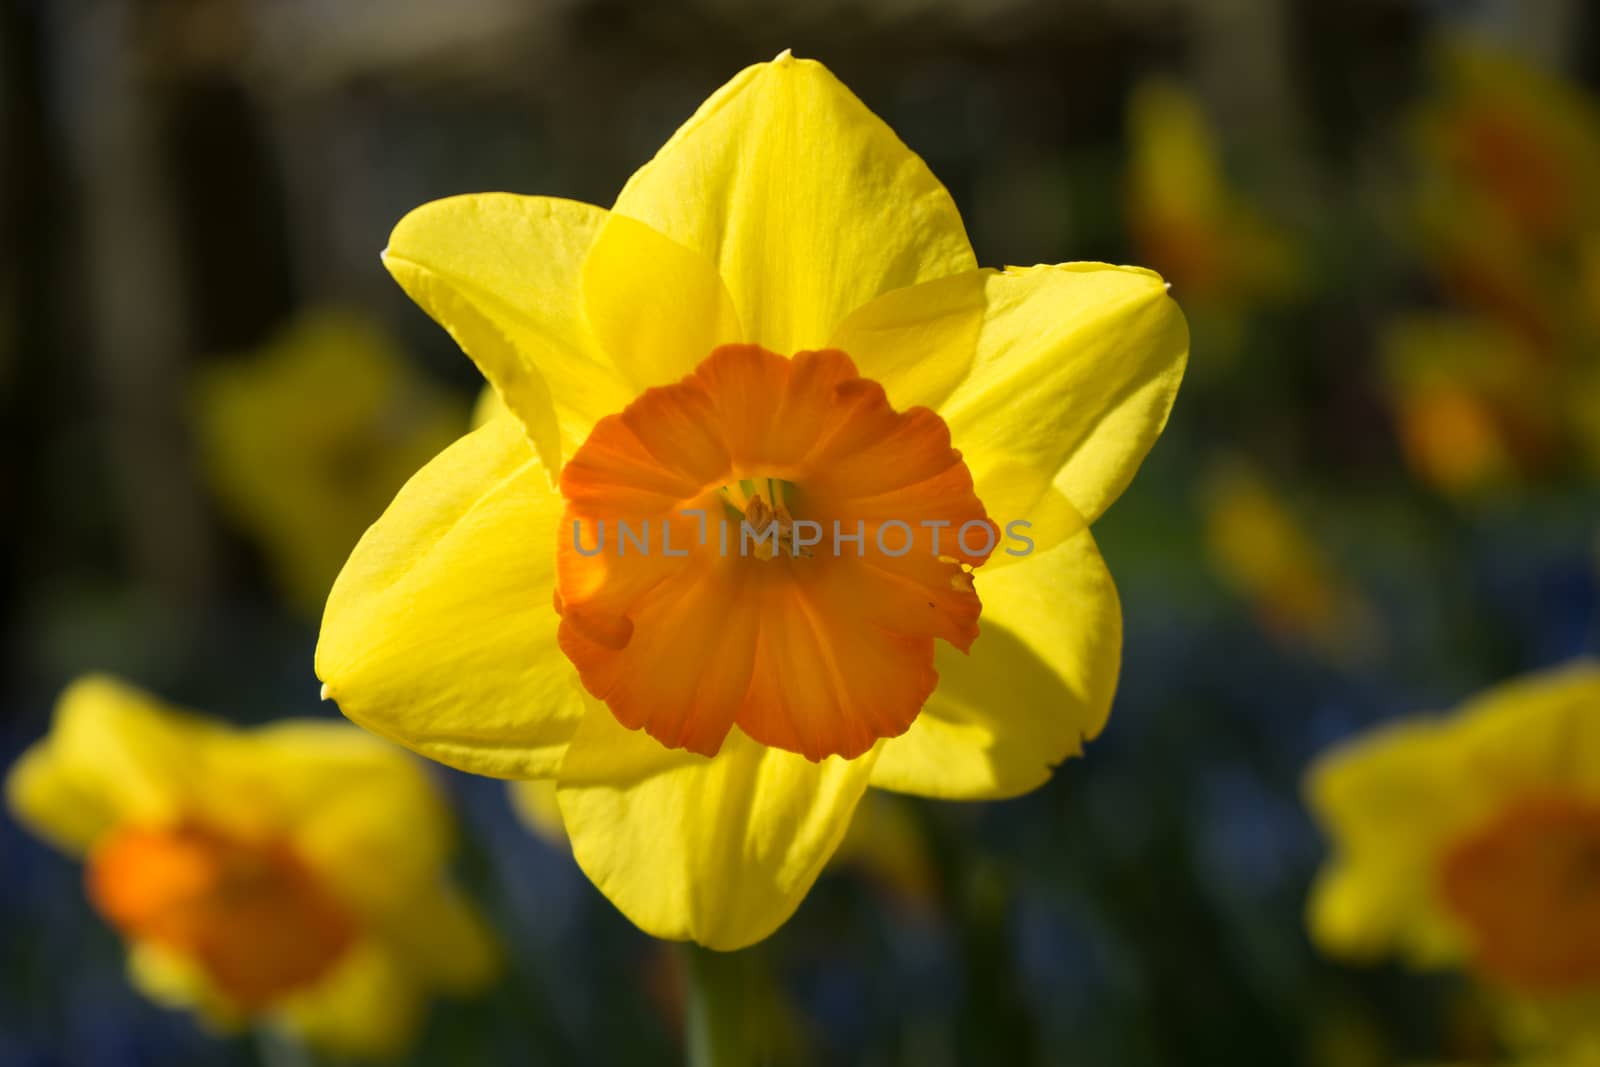 Yellow orange daffodil flowers in a garden in Lisse, Netherlands, Europe on a bright summer day